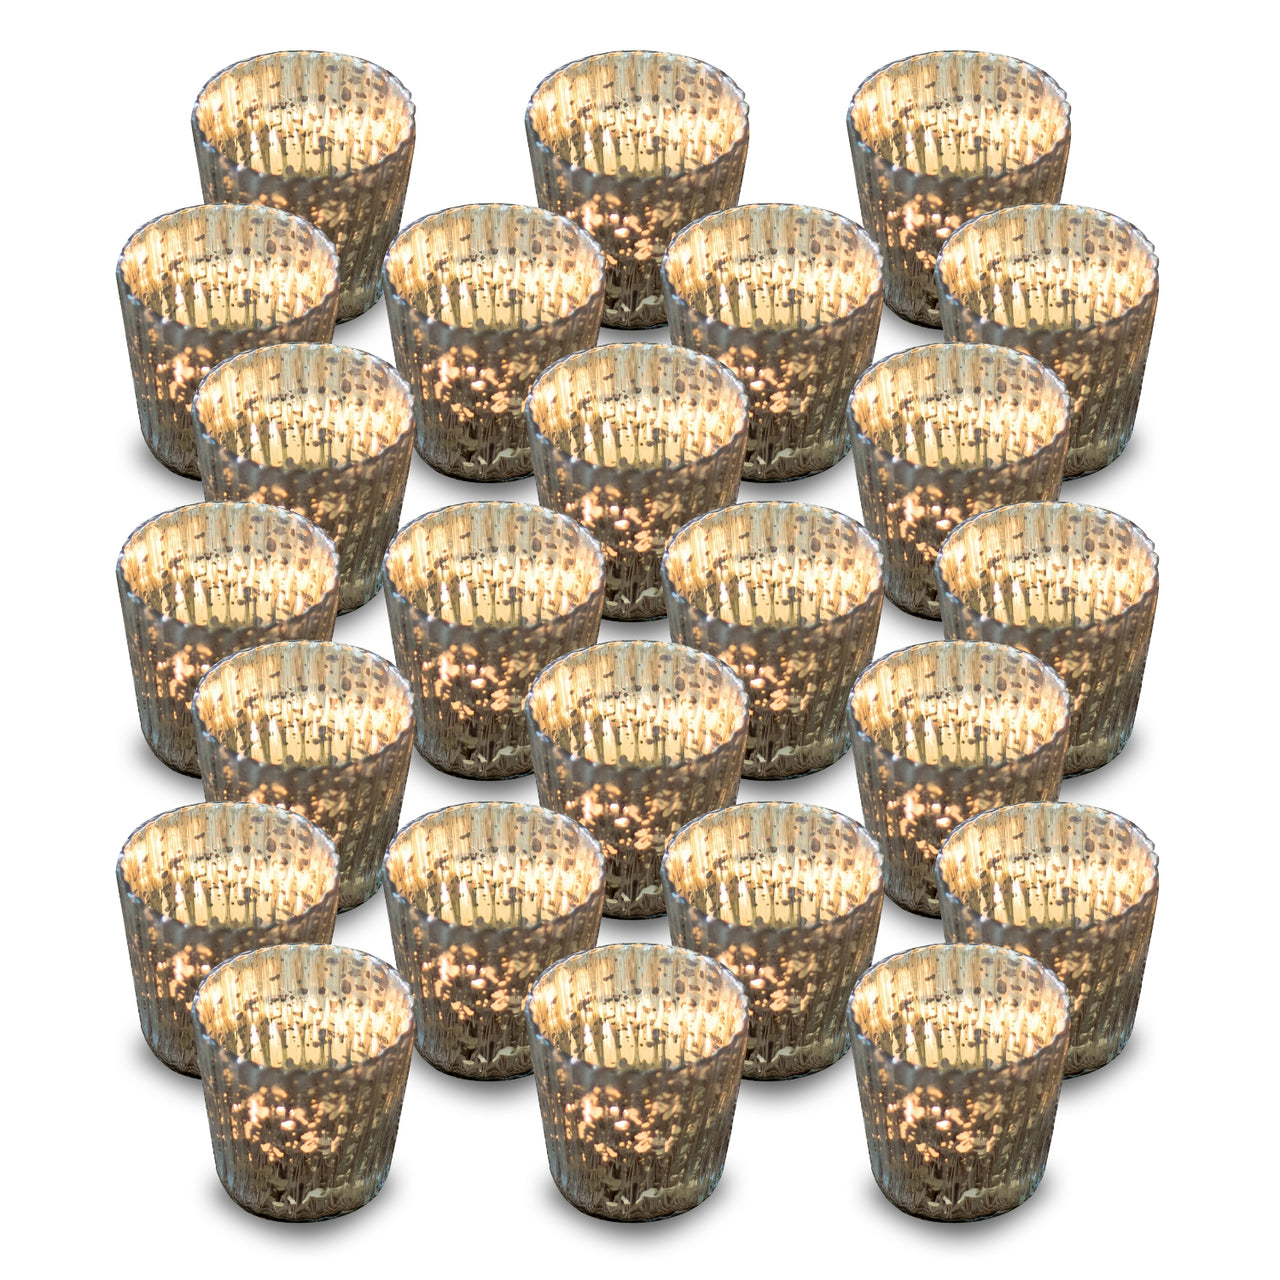 24 Pack | Vintage Mercury Glass Candle Holders (3-Inch, Caroline Design, Vertical Motif, Silver) - For use with Tea Lights - Home Decor, Parties and Wedding Decorations - PaperLanternStore.com - Paper Lanterns, Decor, Party Lights & More